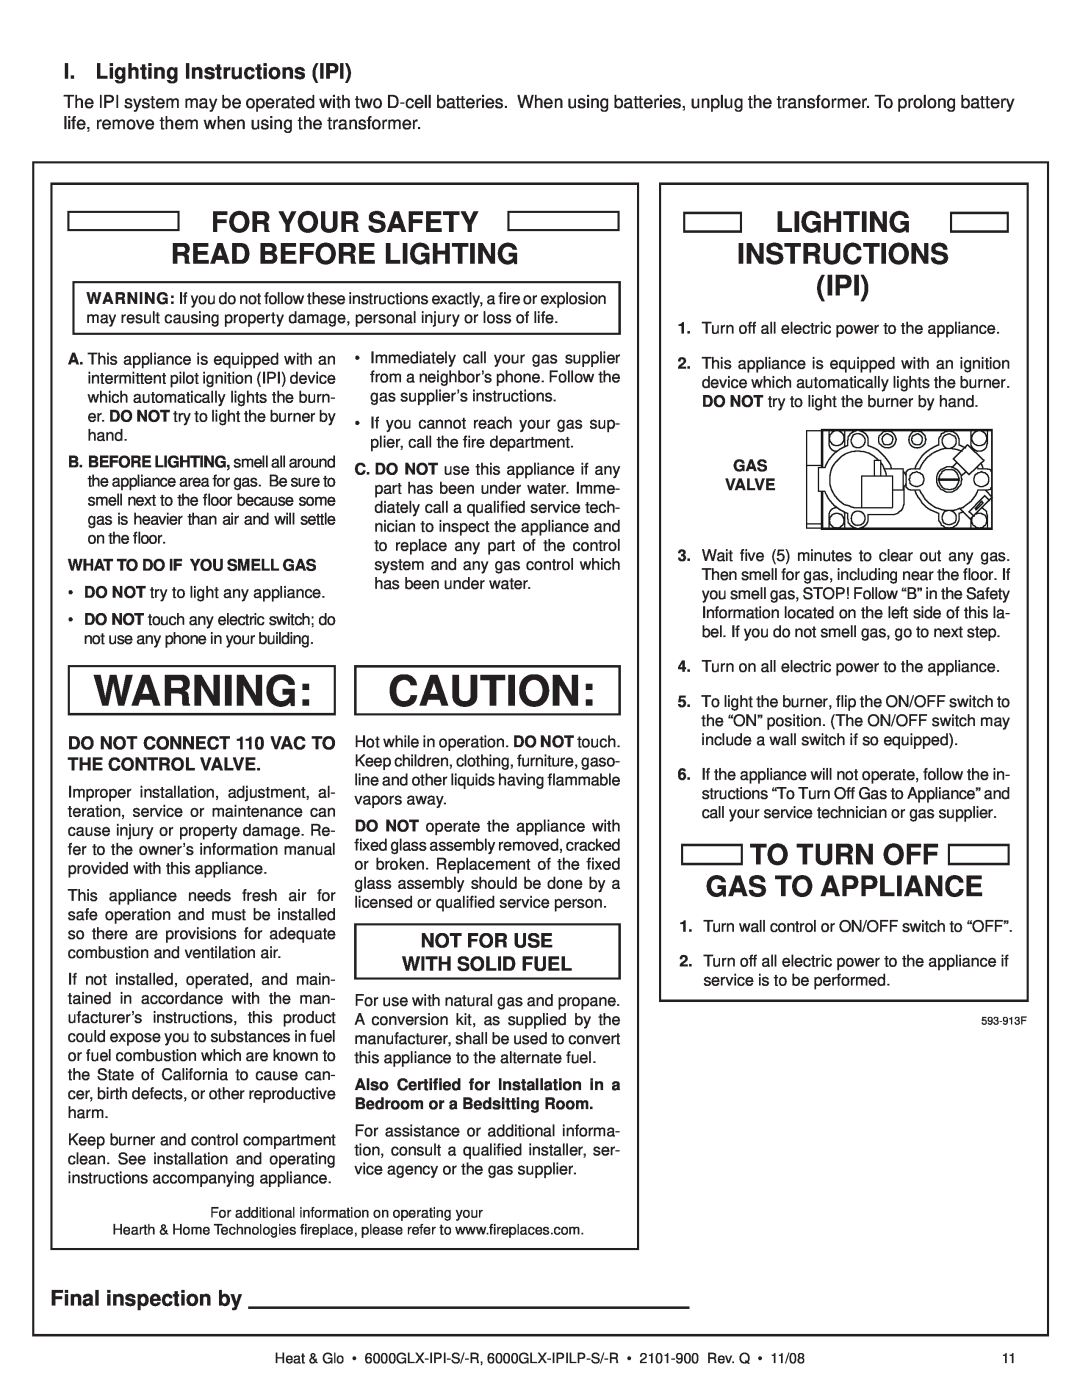 Heat & Glo LifeStyle 6000GLX-IPILP-S/-R For Your Safety Read Before Lighting, Lighting Instructions Ipi, Warning: Caution 